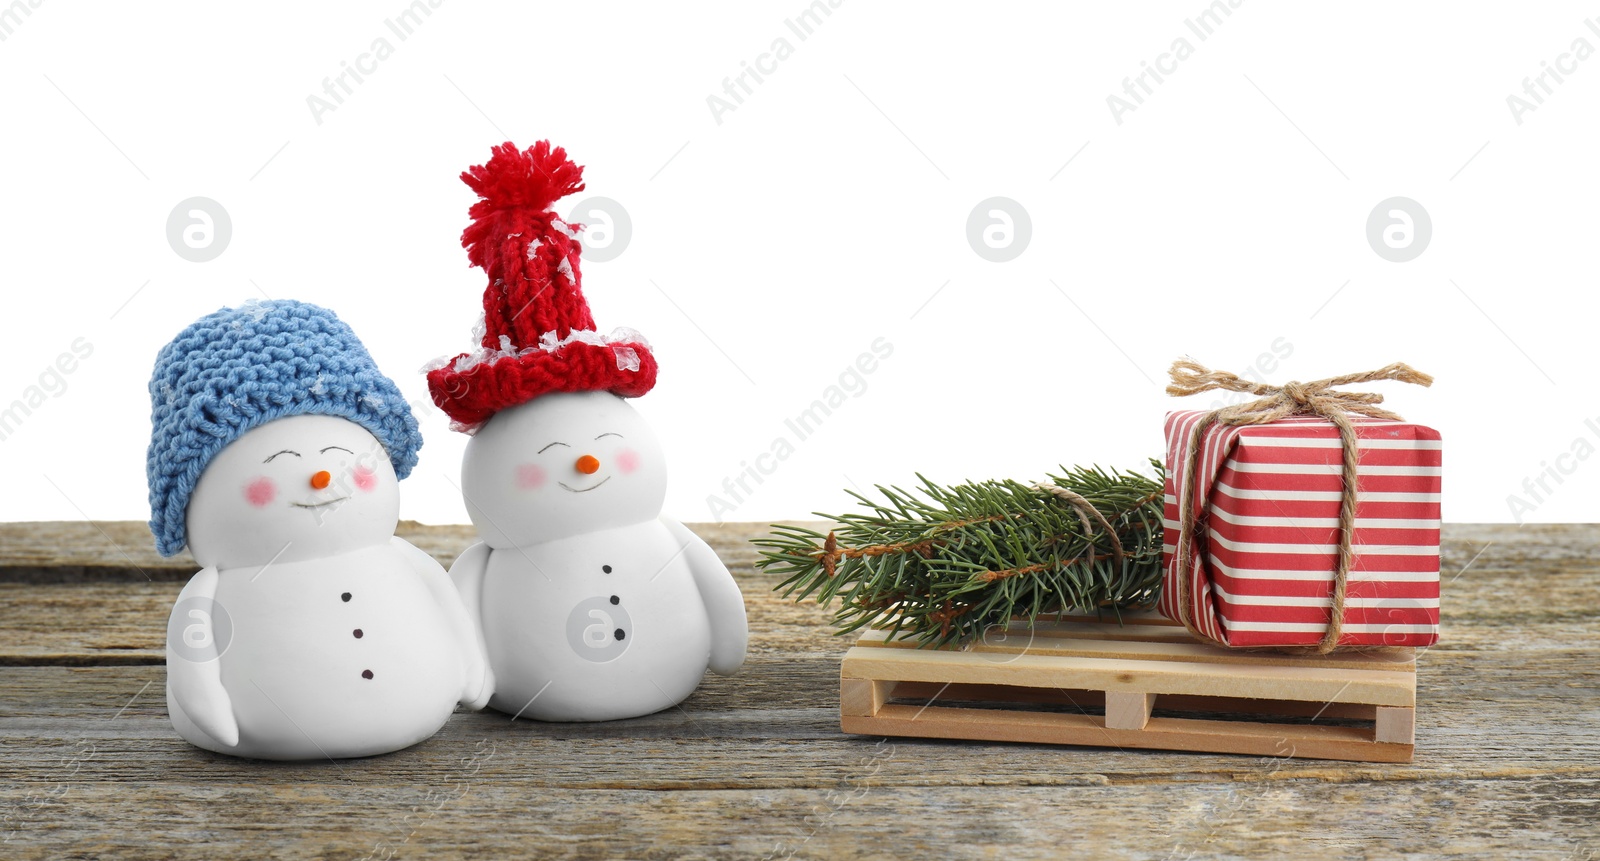 Photo of Cute decorative snowmen, gift box and fir tree branches on wooden table against white background